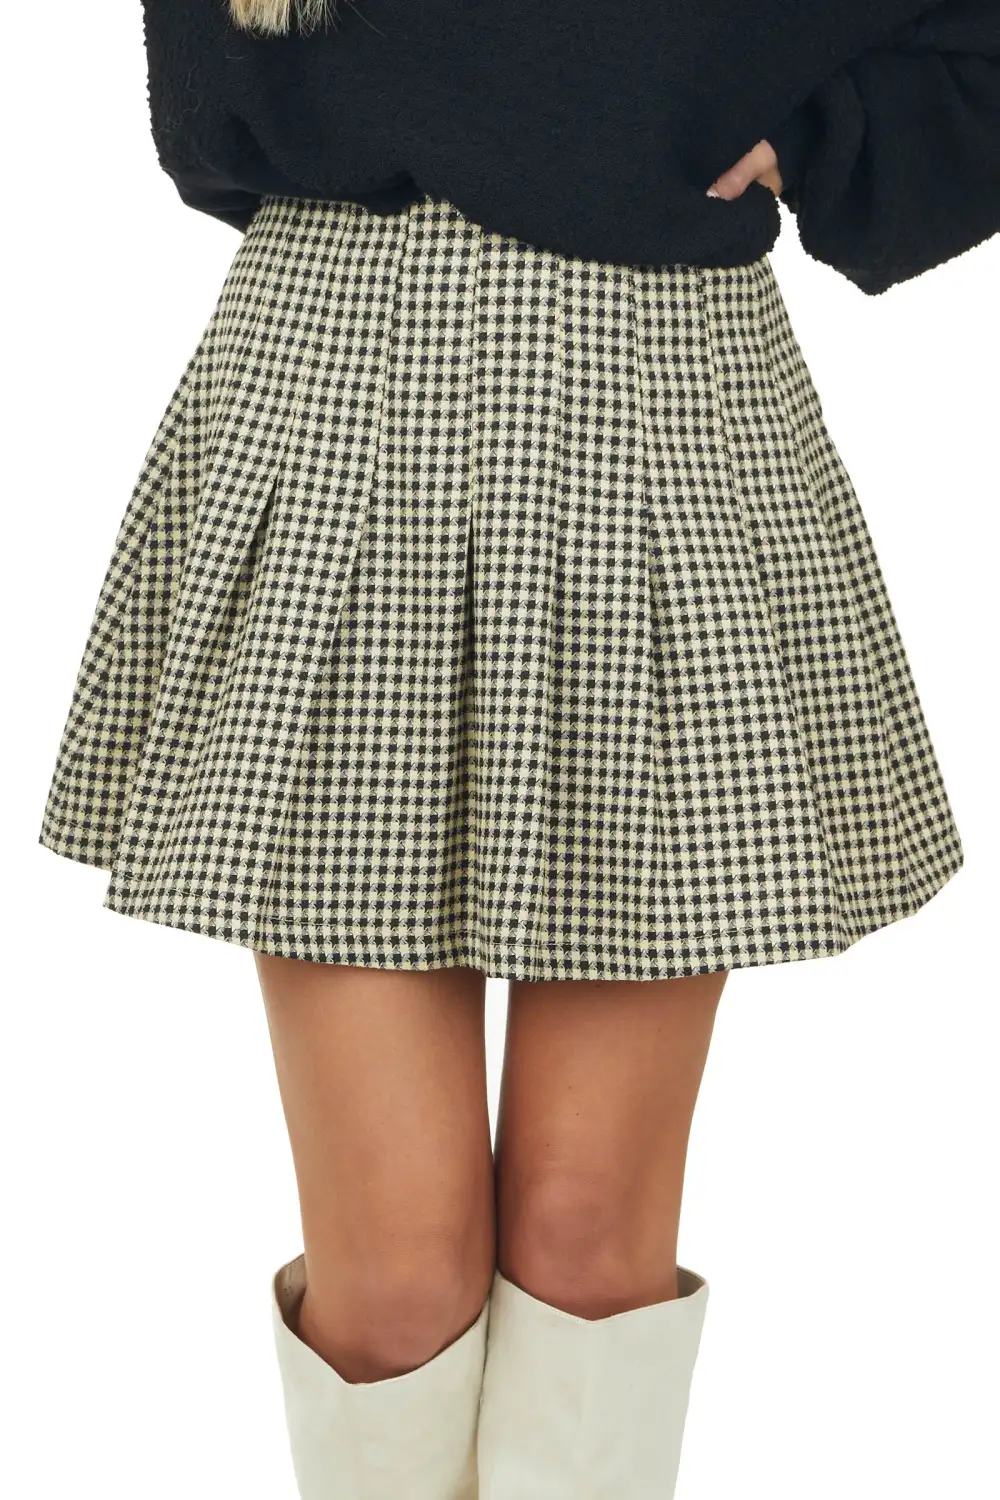 Black and Cream Houndstooth Pleated Skirt